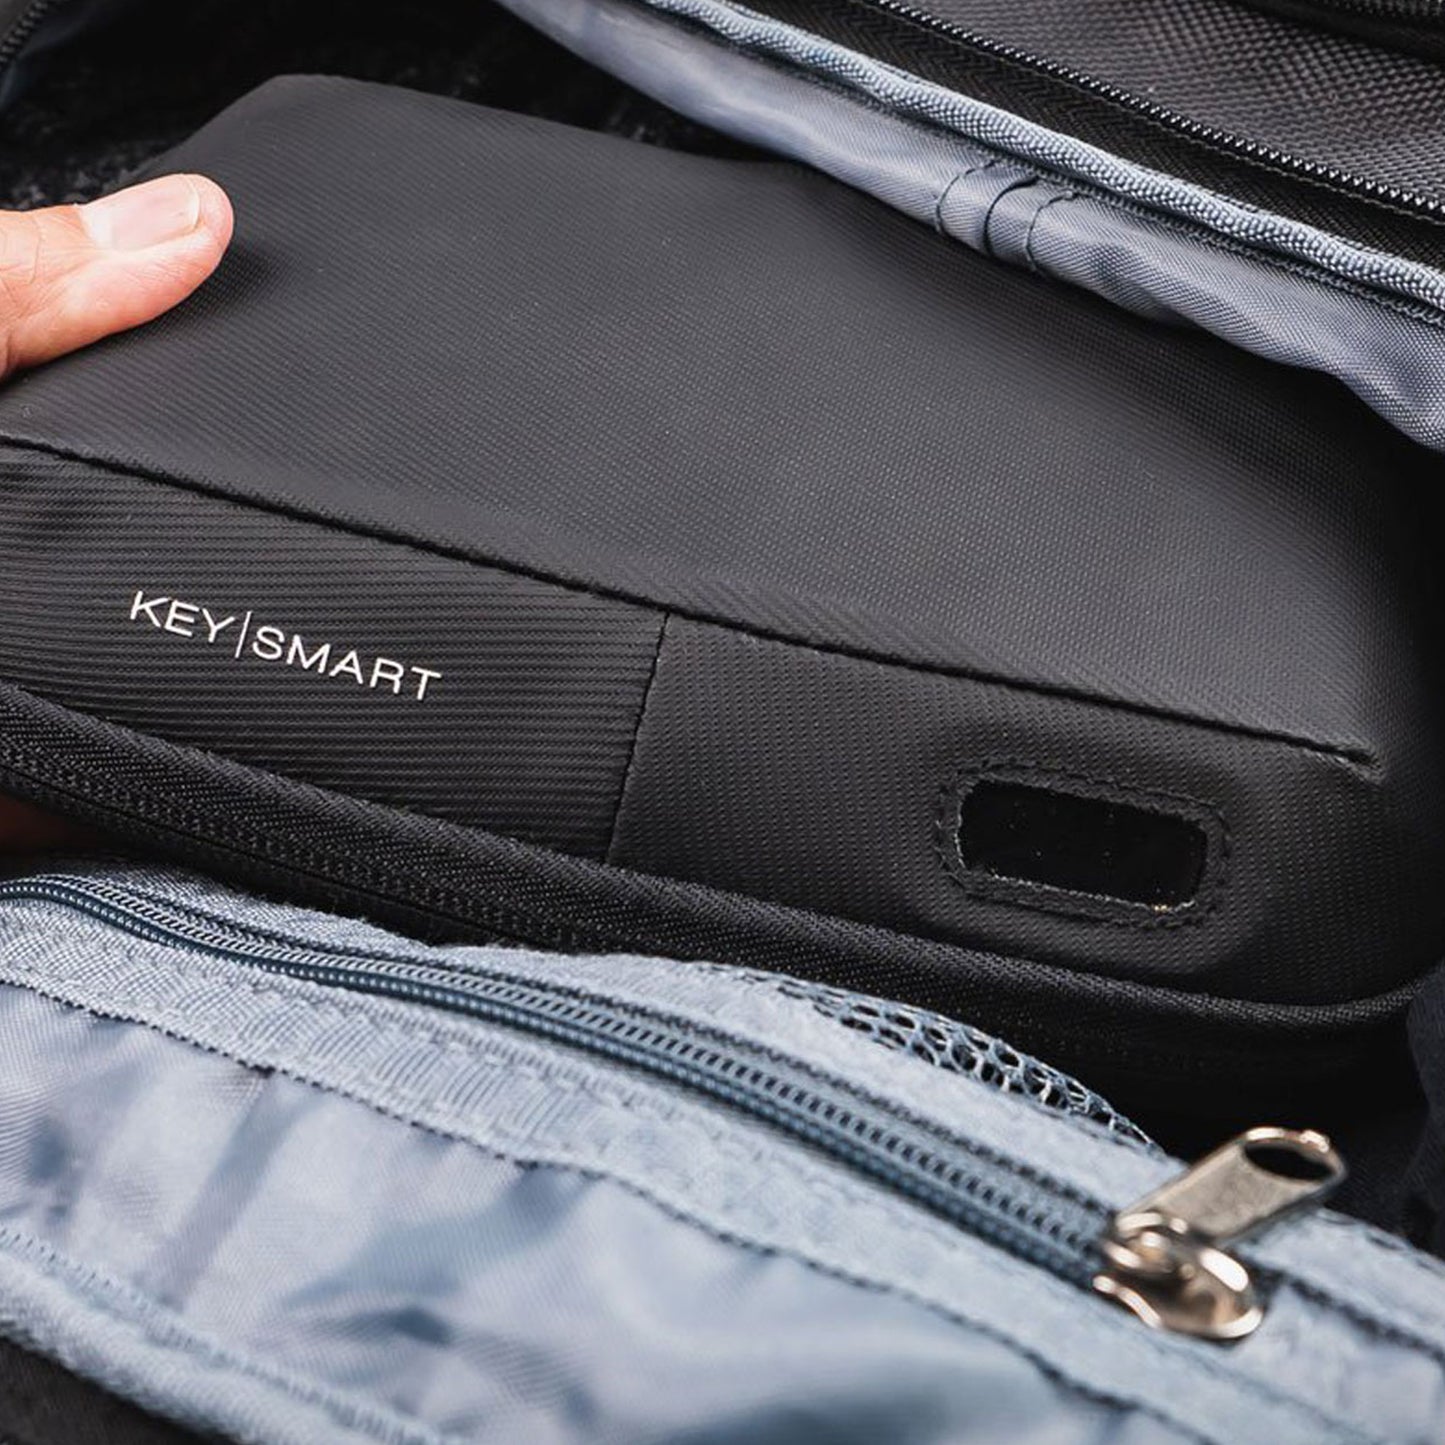 CleanTray To-Go Phone Sanitizer